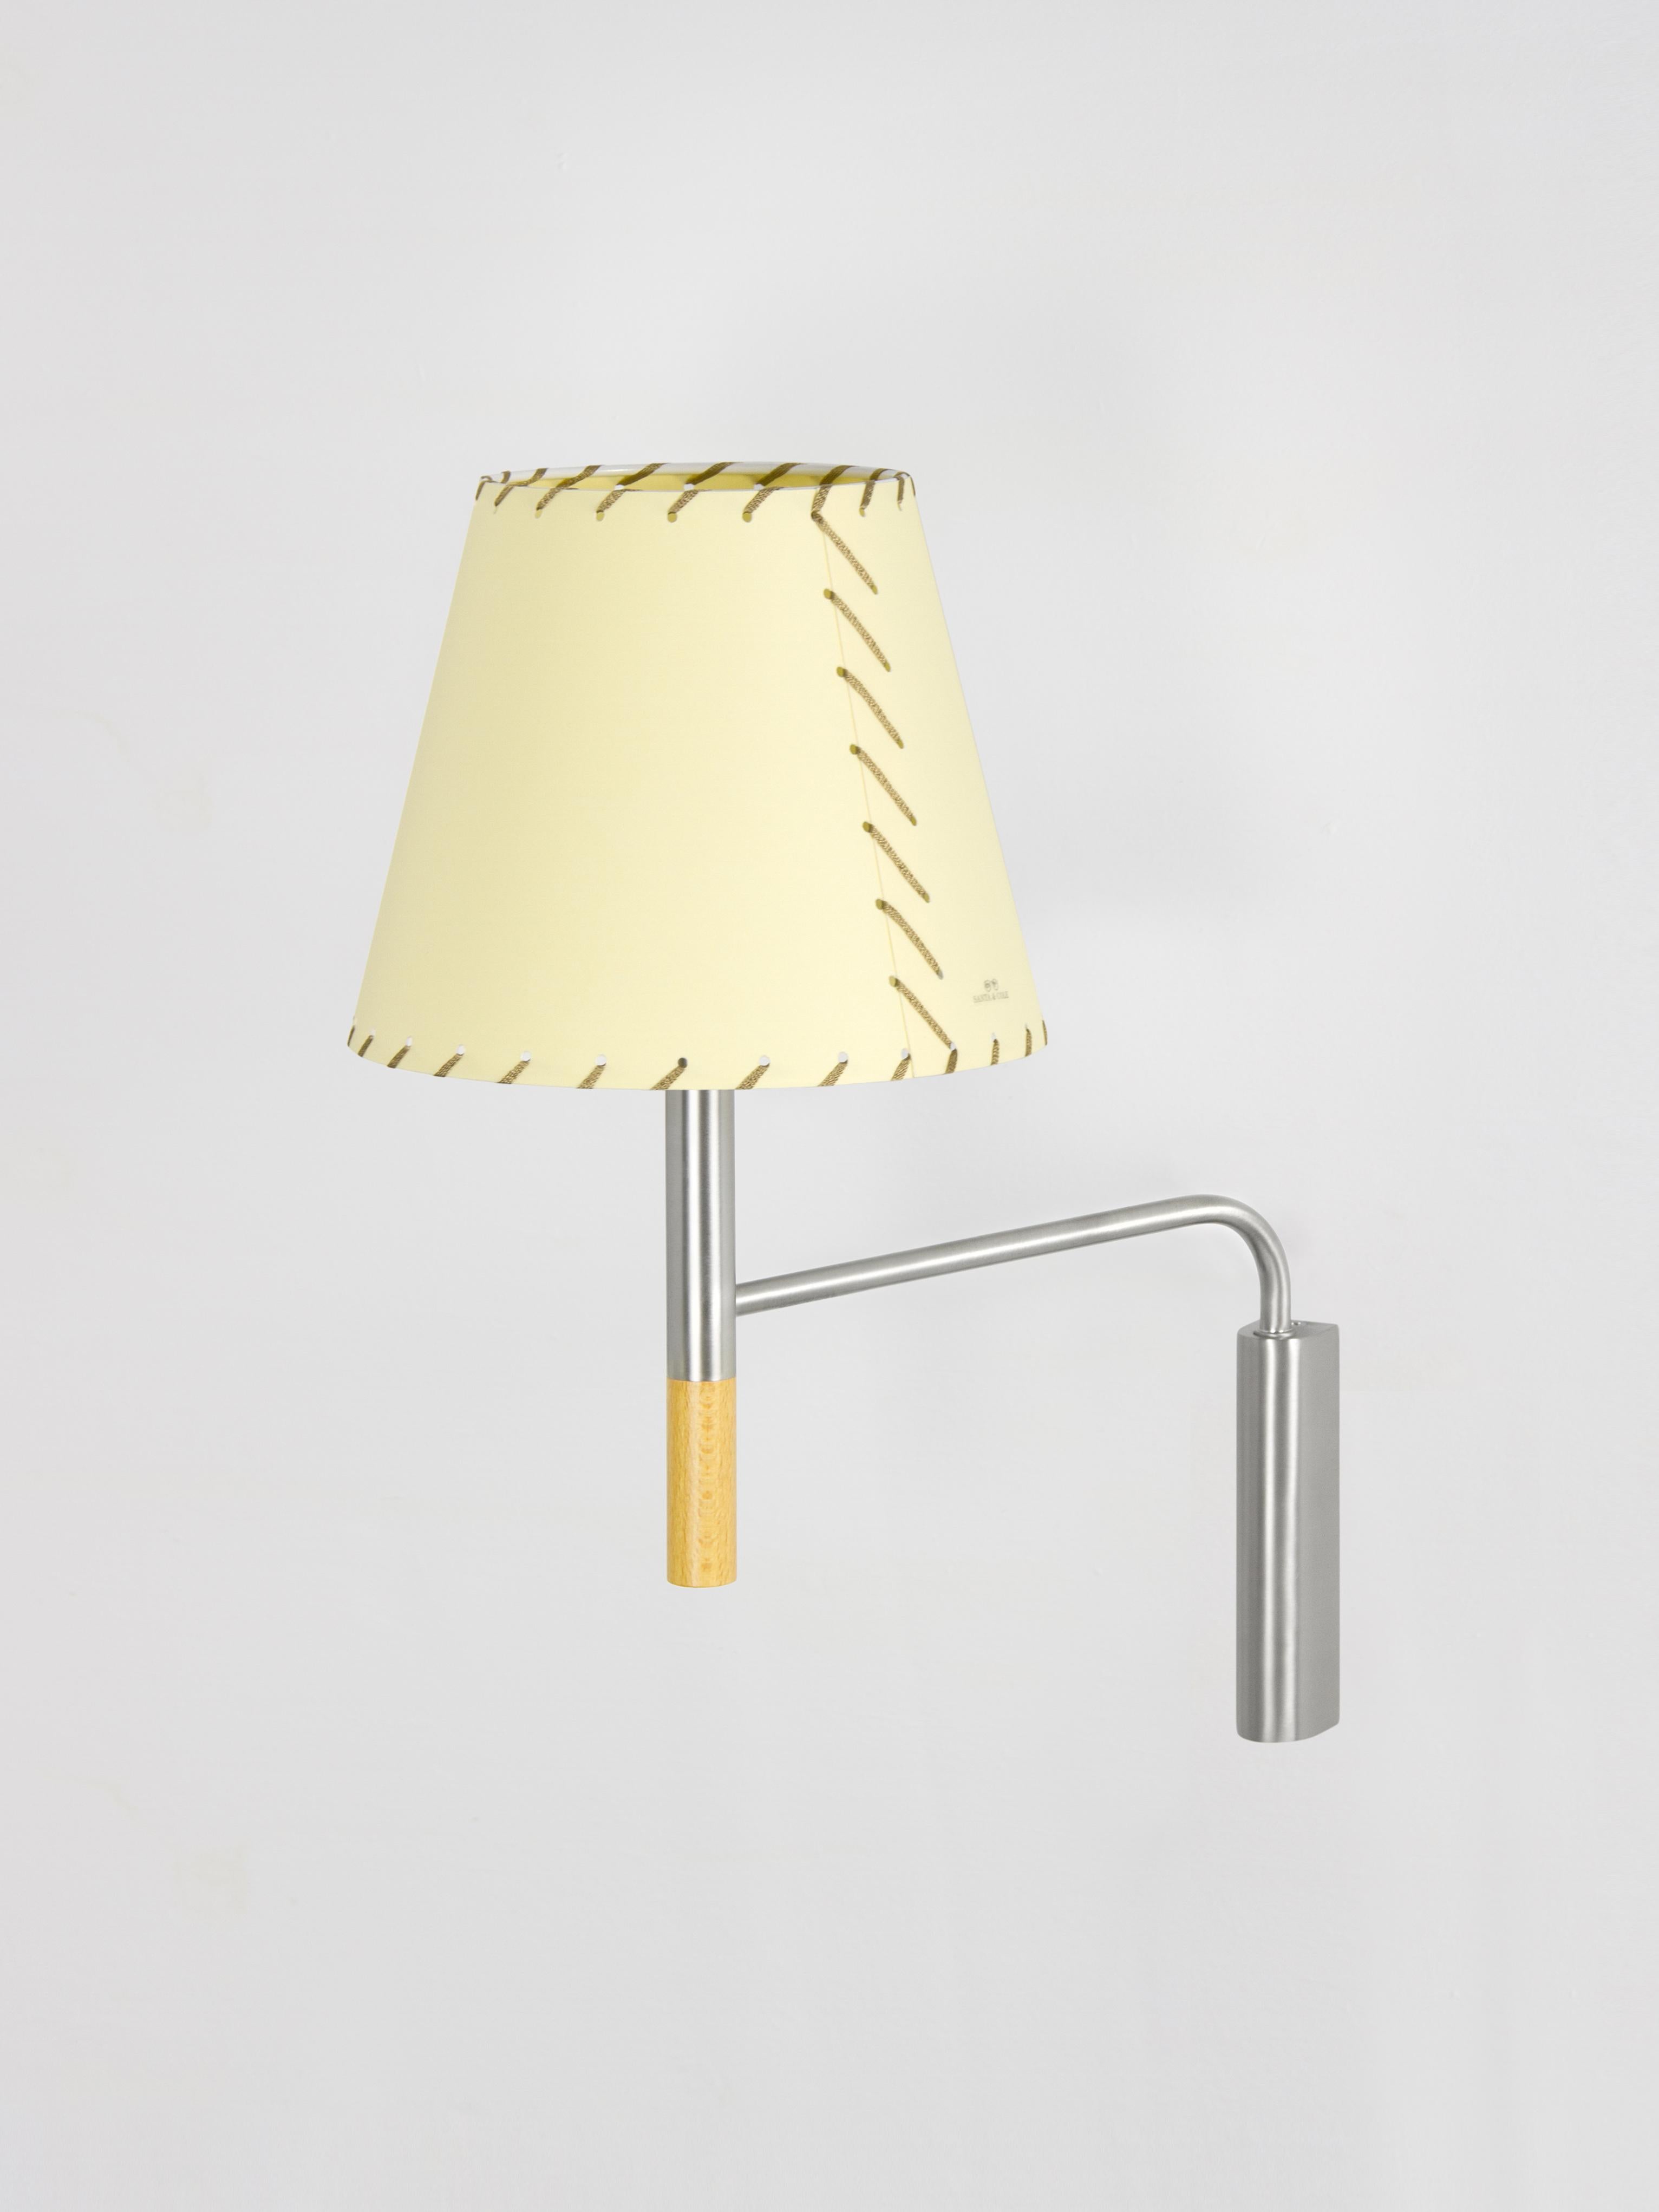 Beige BC3 wall lamp by Santa & Cole
Dimensions: D 20 x W 37 x H 41 cm
Materials: Metal, beech wood, stitched parchment.

The BC1, BC2 and BC3 wall lamps are the epitome of sturdy construction, aesthetic sobriety and functional quality. Their